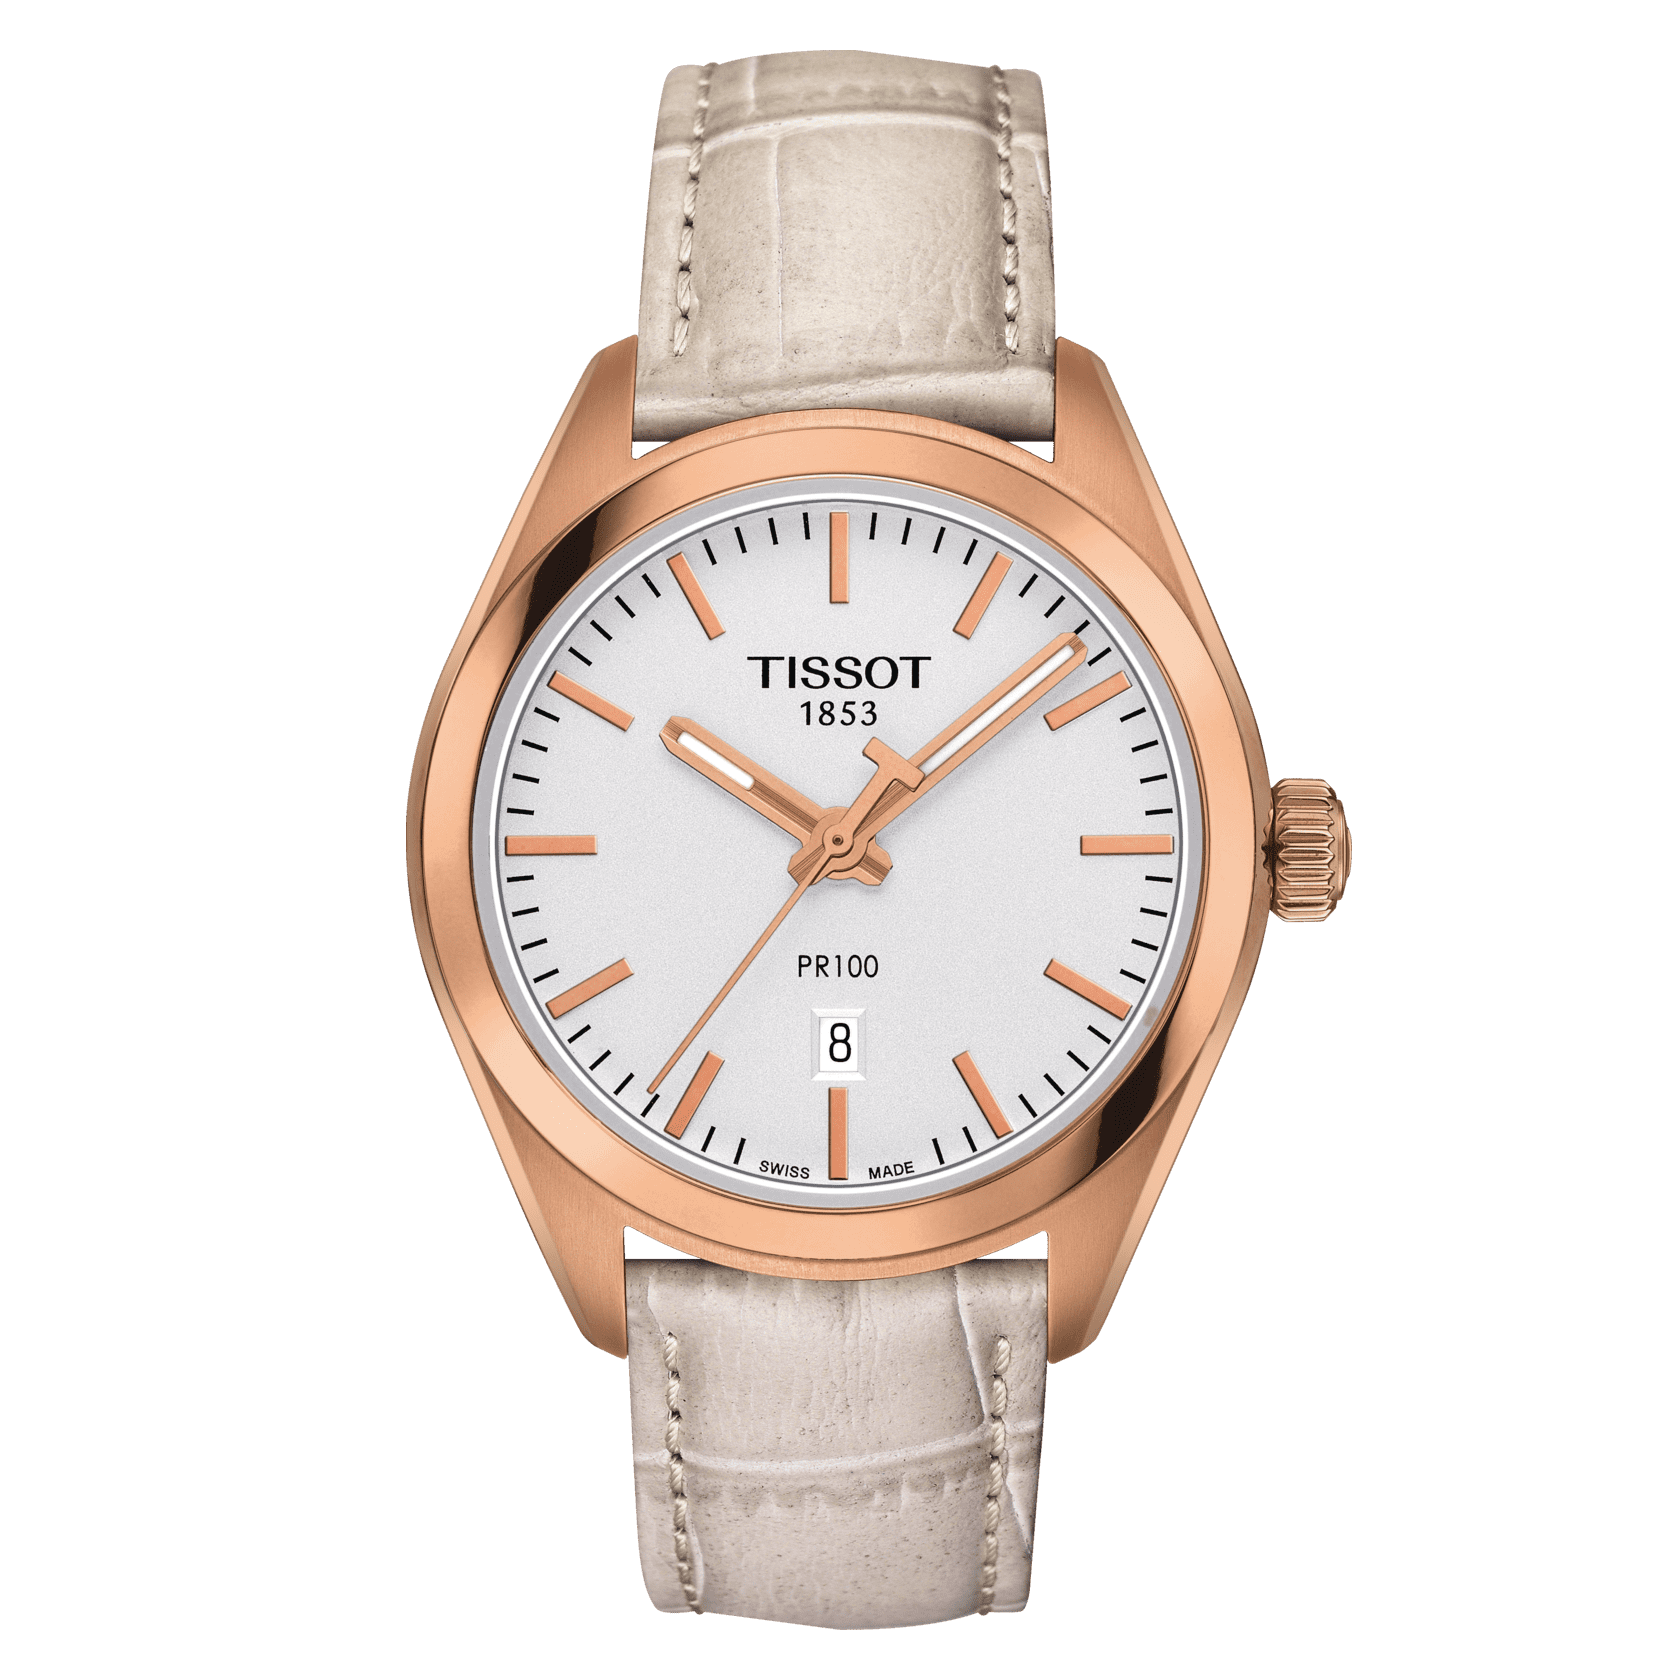 TISSOT PR 100 QUARTZ (T101.210.36.031.00)
Water-resistant up to a pressure of 10 bar (100 m / 330 ft)
316L stainless steel case with rose gold PVD coating
Scratch-resistant sapphire crystal
33mm Case
Swiss quartz ETA F04.111 Movement
Cream Coloe lea